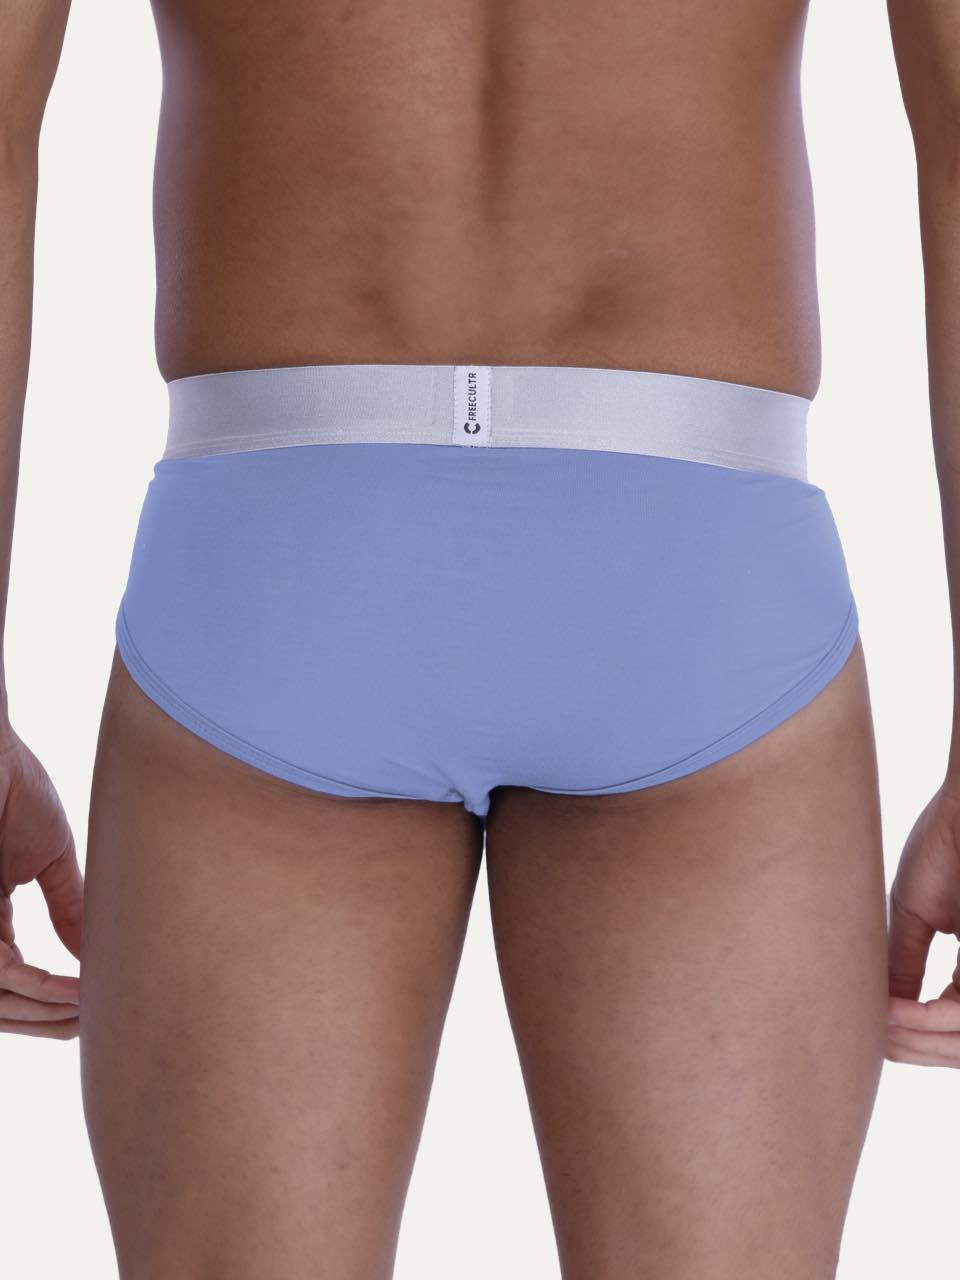 Men's Anti-Bacterial Micro Modal Briefs with Silverfox Waistband (Pack of 1)